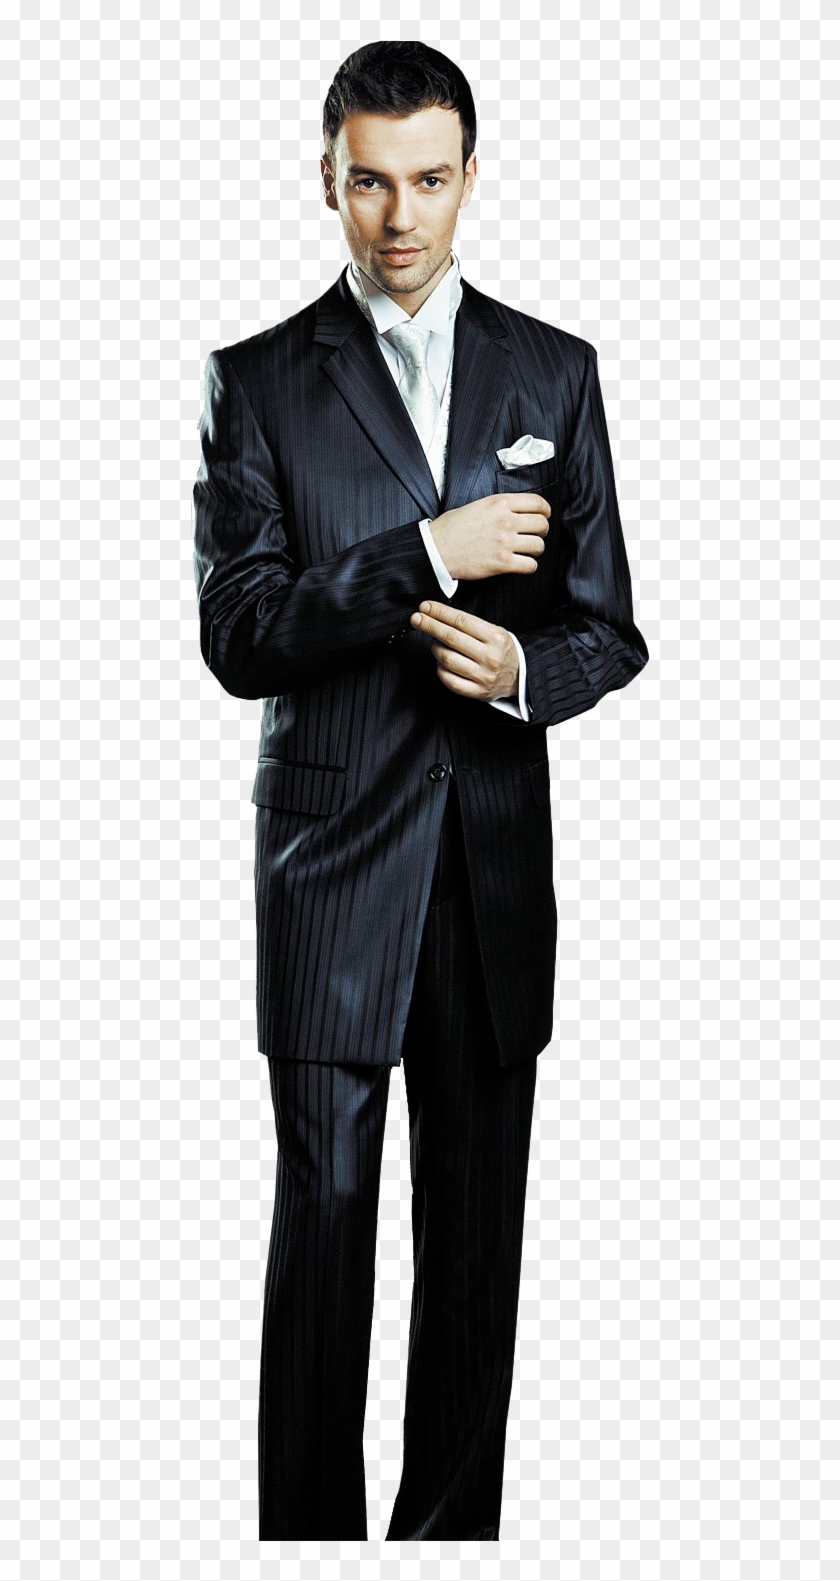 Businessman In Suit Png Hd Quality - Businessman Png Clipart #5525063